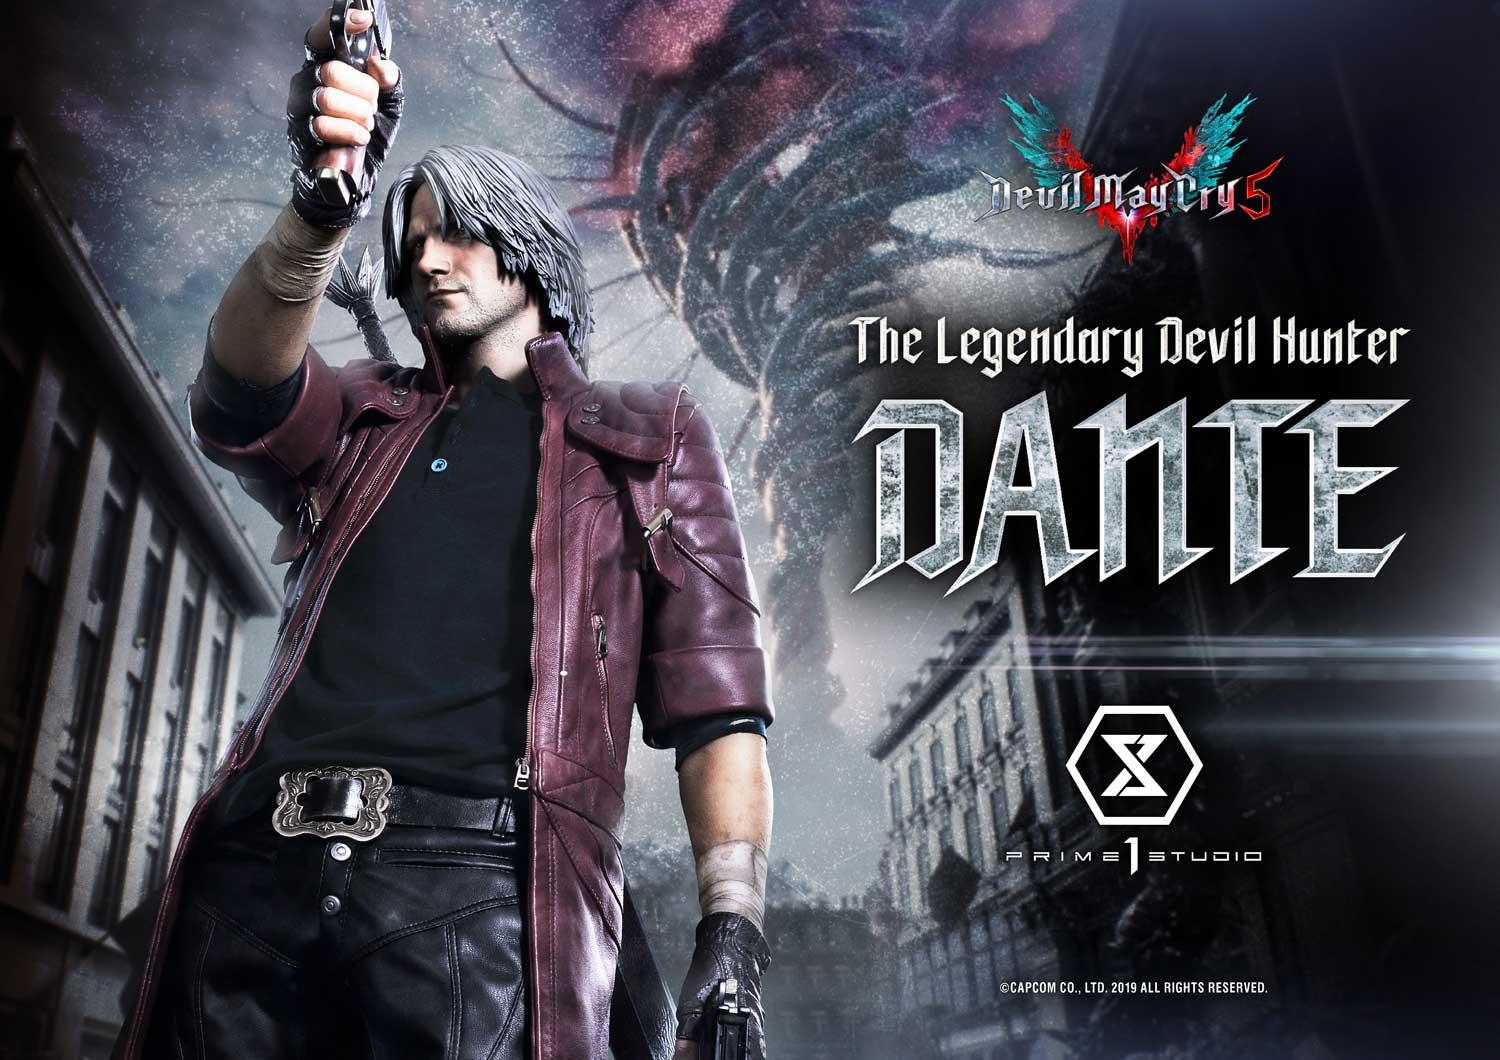 Devil May Cry 5 Director Proud of DmC: Devil May Cry, Learned a